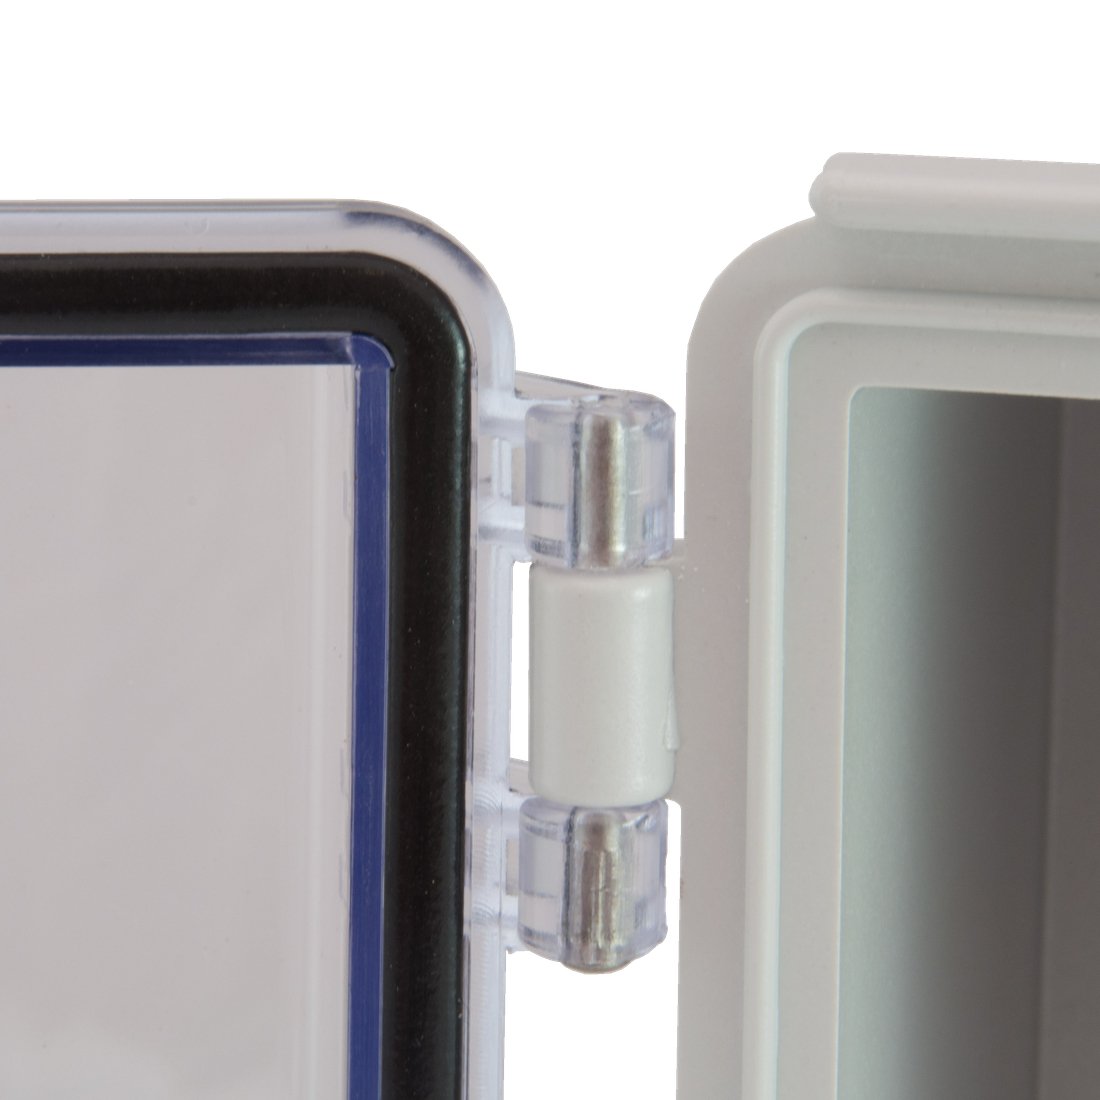 Watertight Enclosure with Hinged and Latching Lid - UL Listed - 6.7” x 10.63” x 4.33" - EKM Metering Inc.